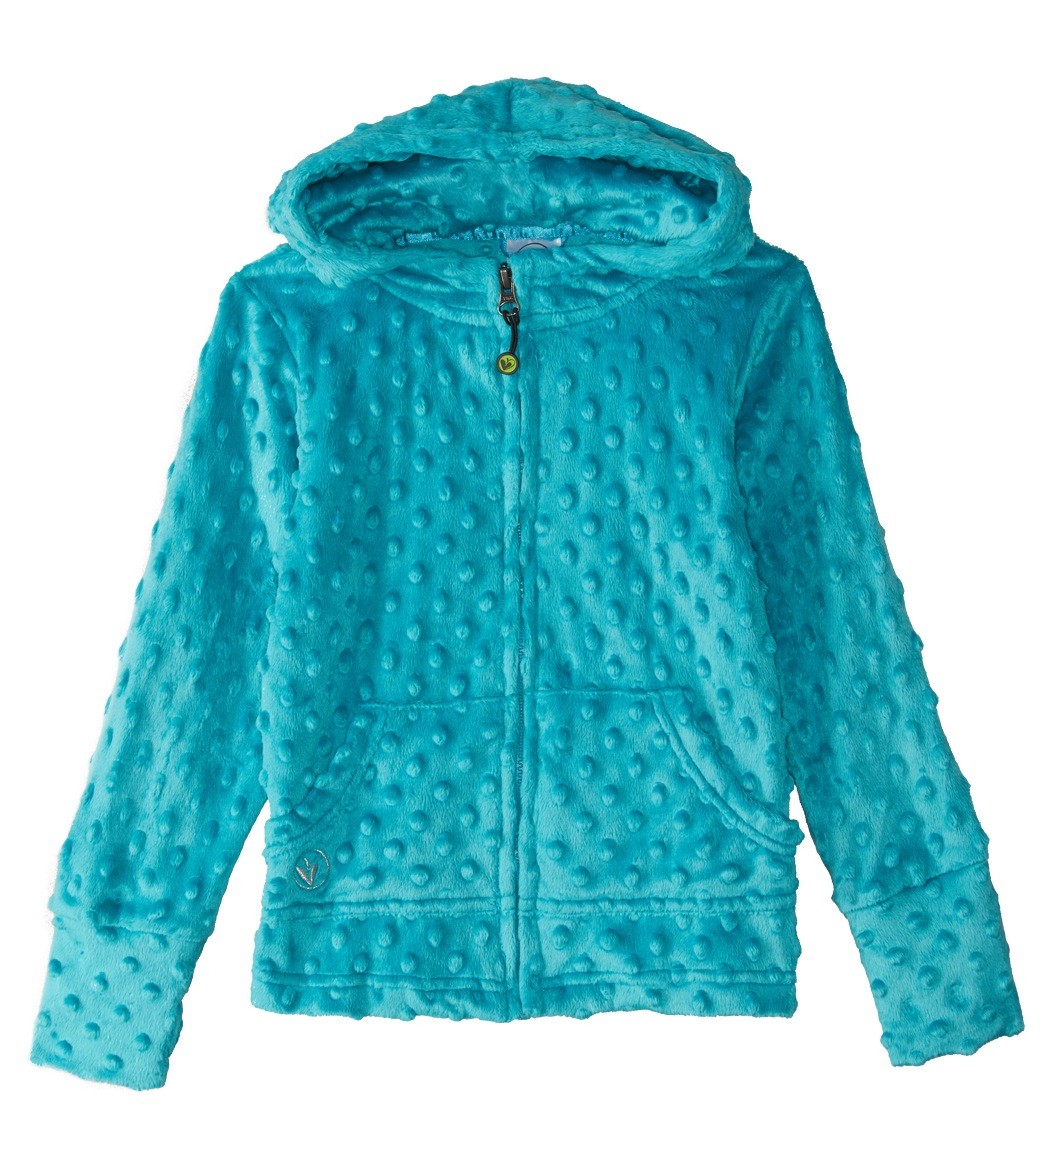 Limeapple Girls' Cuddle Bubble Hoodie Little Kid/Big Kid - Turquoise 4 Polyester - Swimoutlet.com